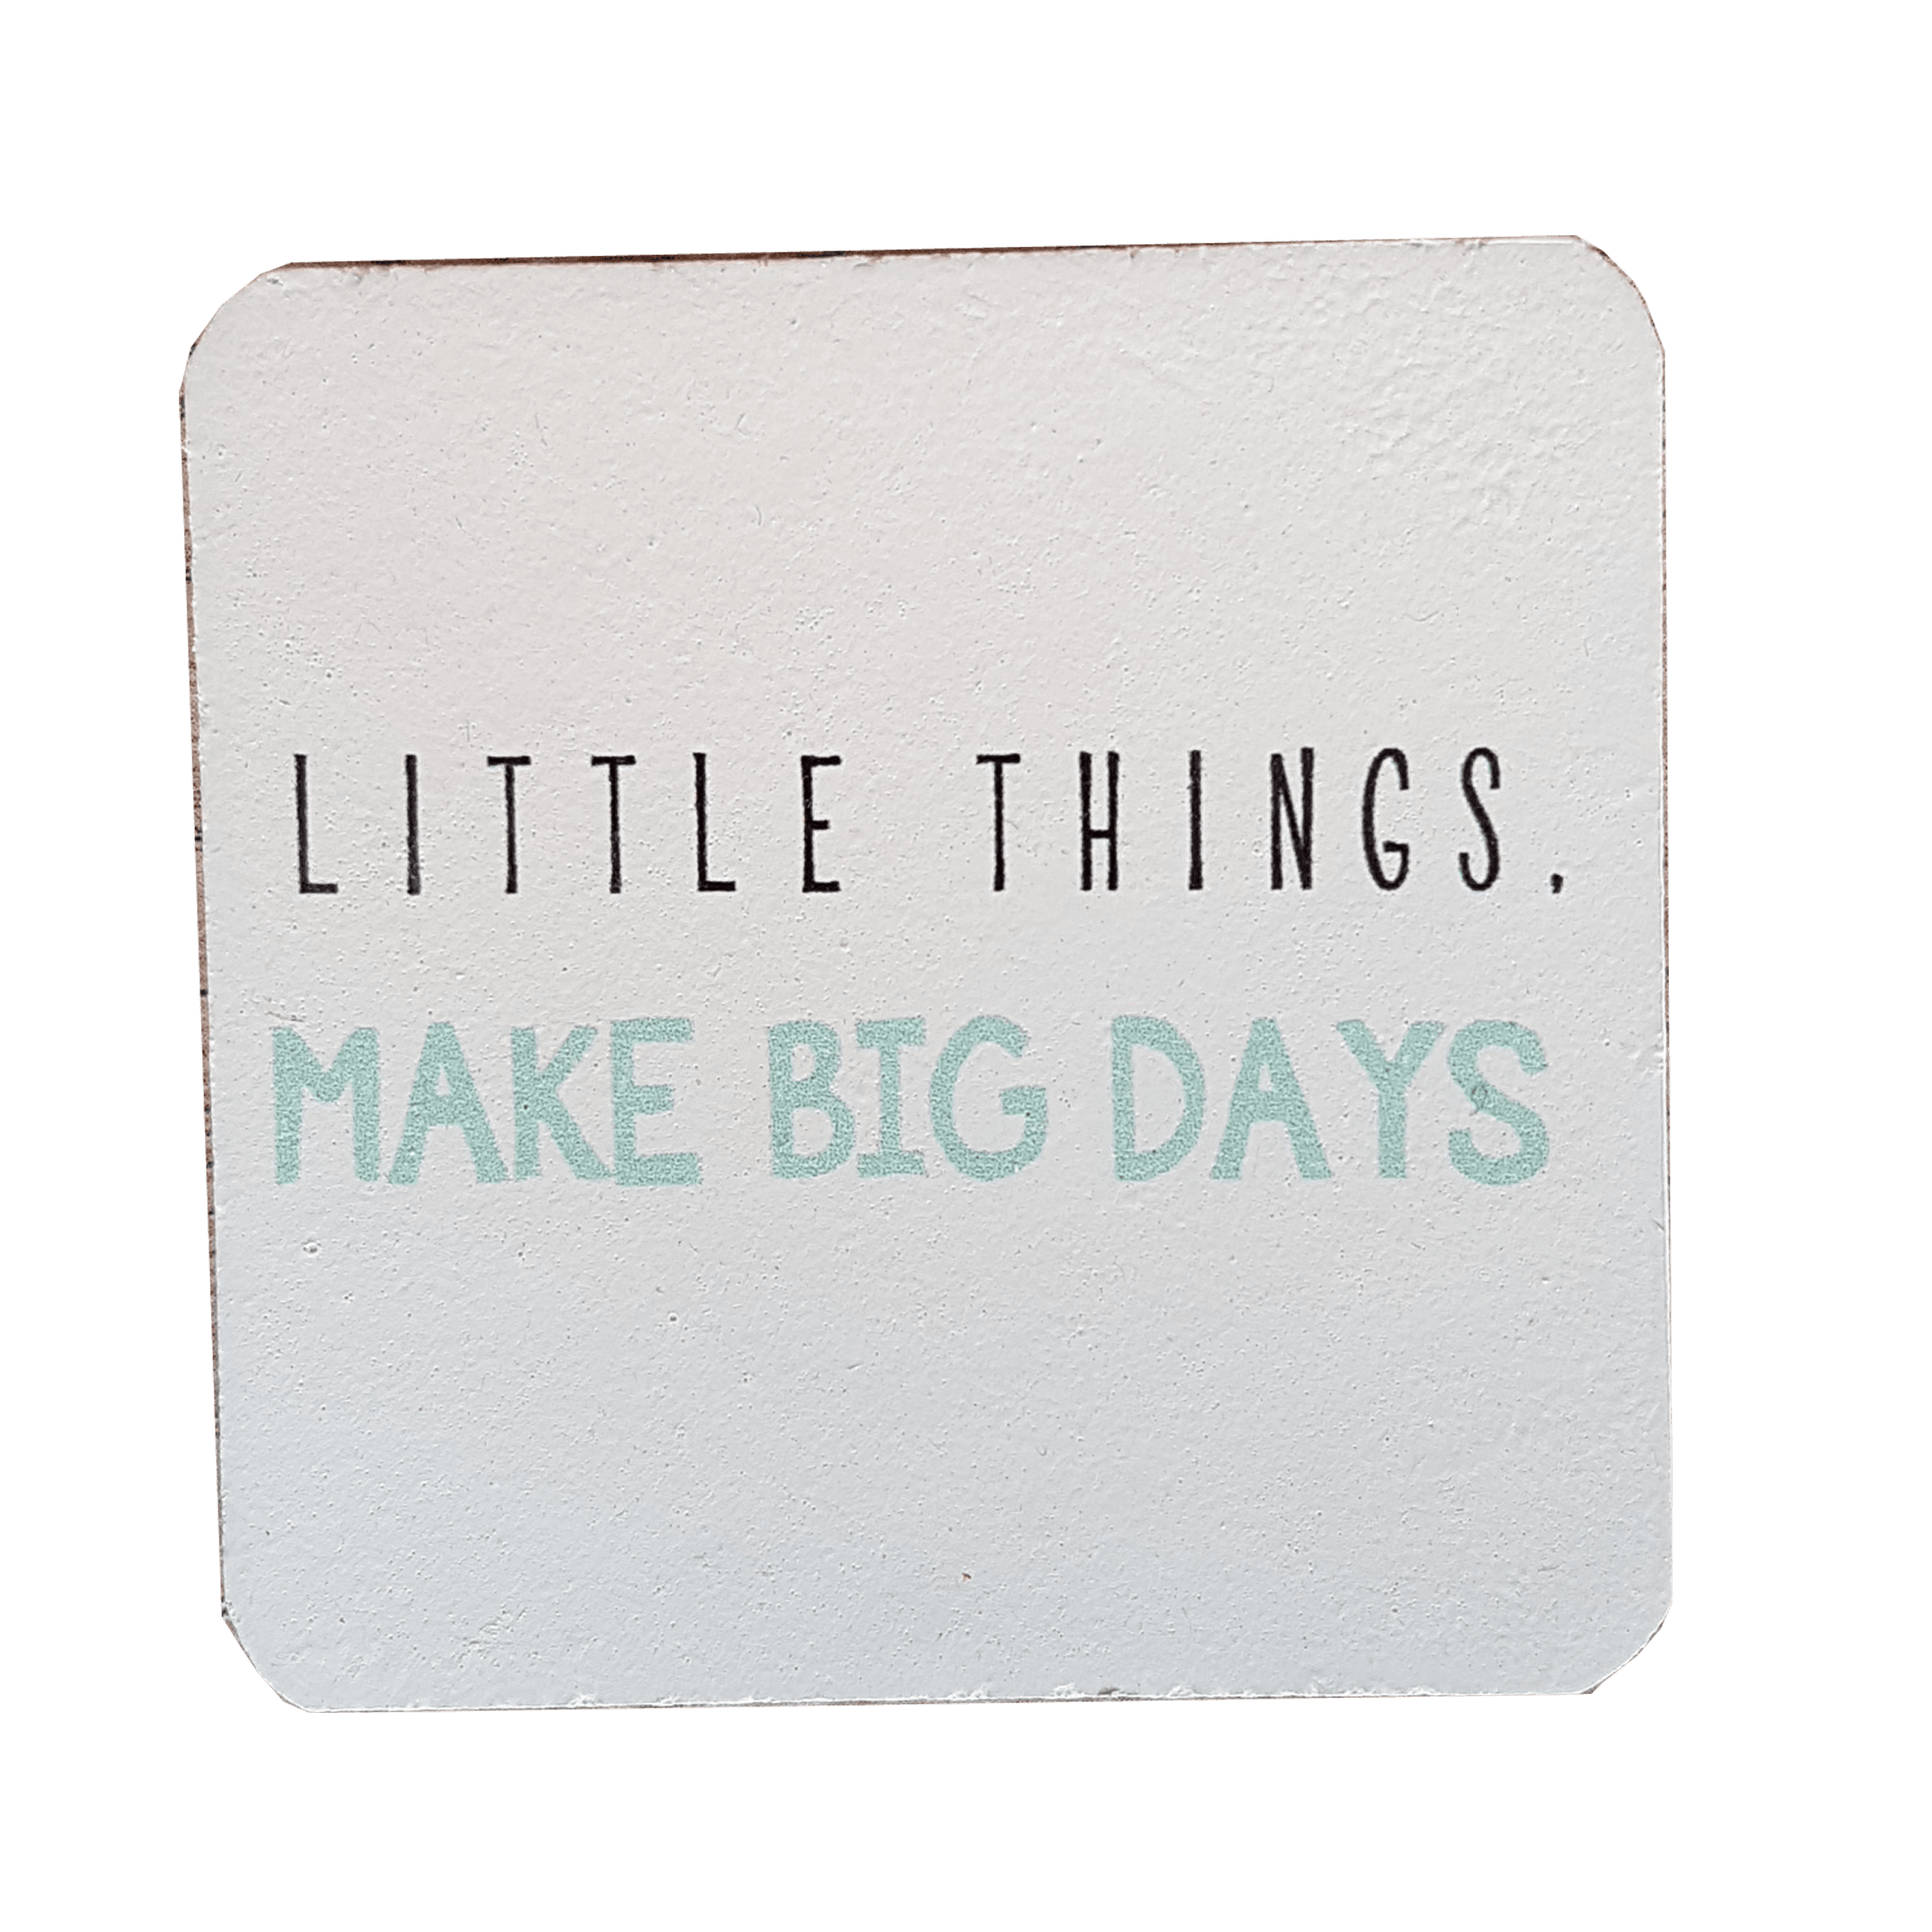 C&F Wooden Quote Magnet - Little Things Make Big Days